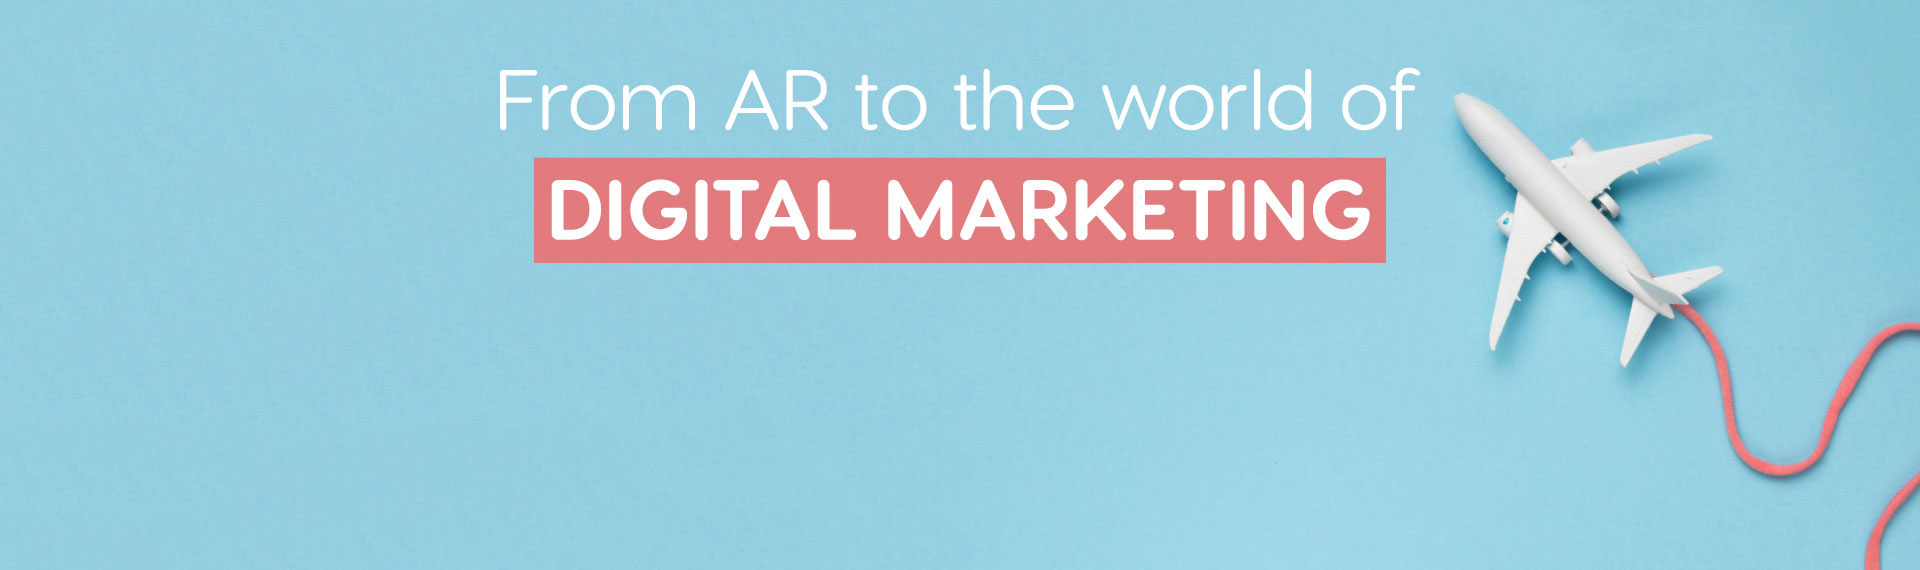 How is AR Changing the Digital World